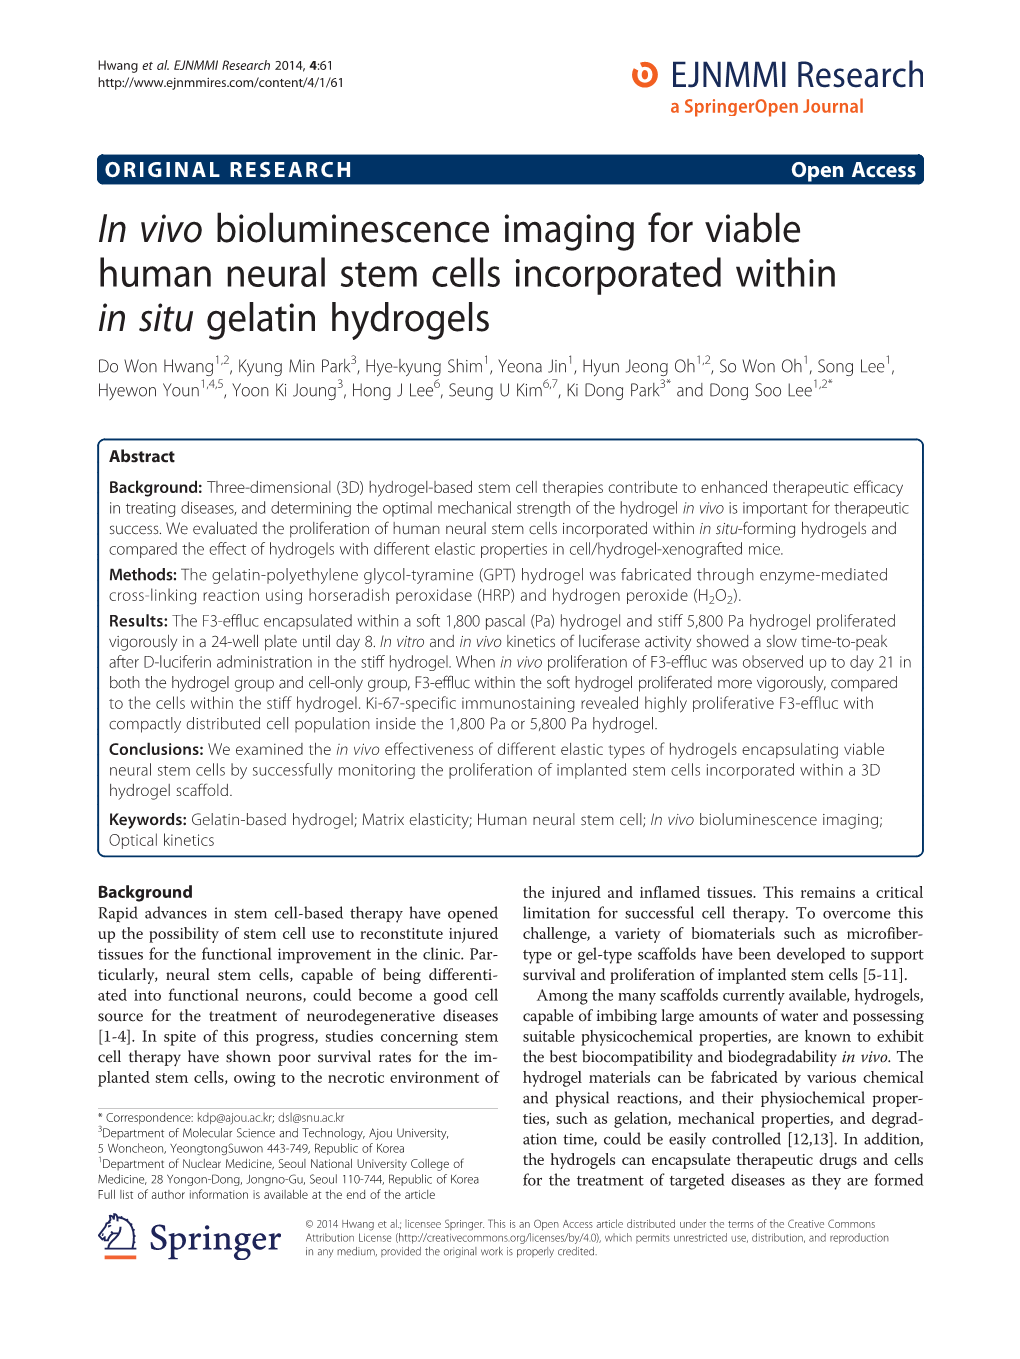 In Vivo Bioluminescence Imaging for Viable Human Neural Stem Cells Incorporated Within in Situ Gelatin Hydrogels